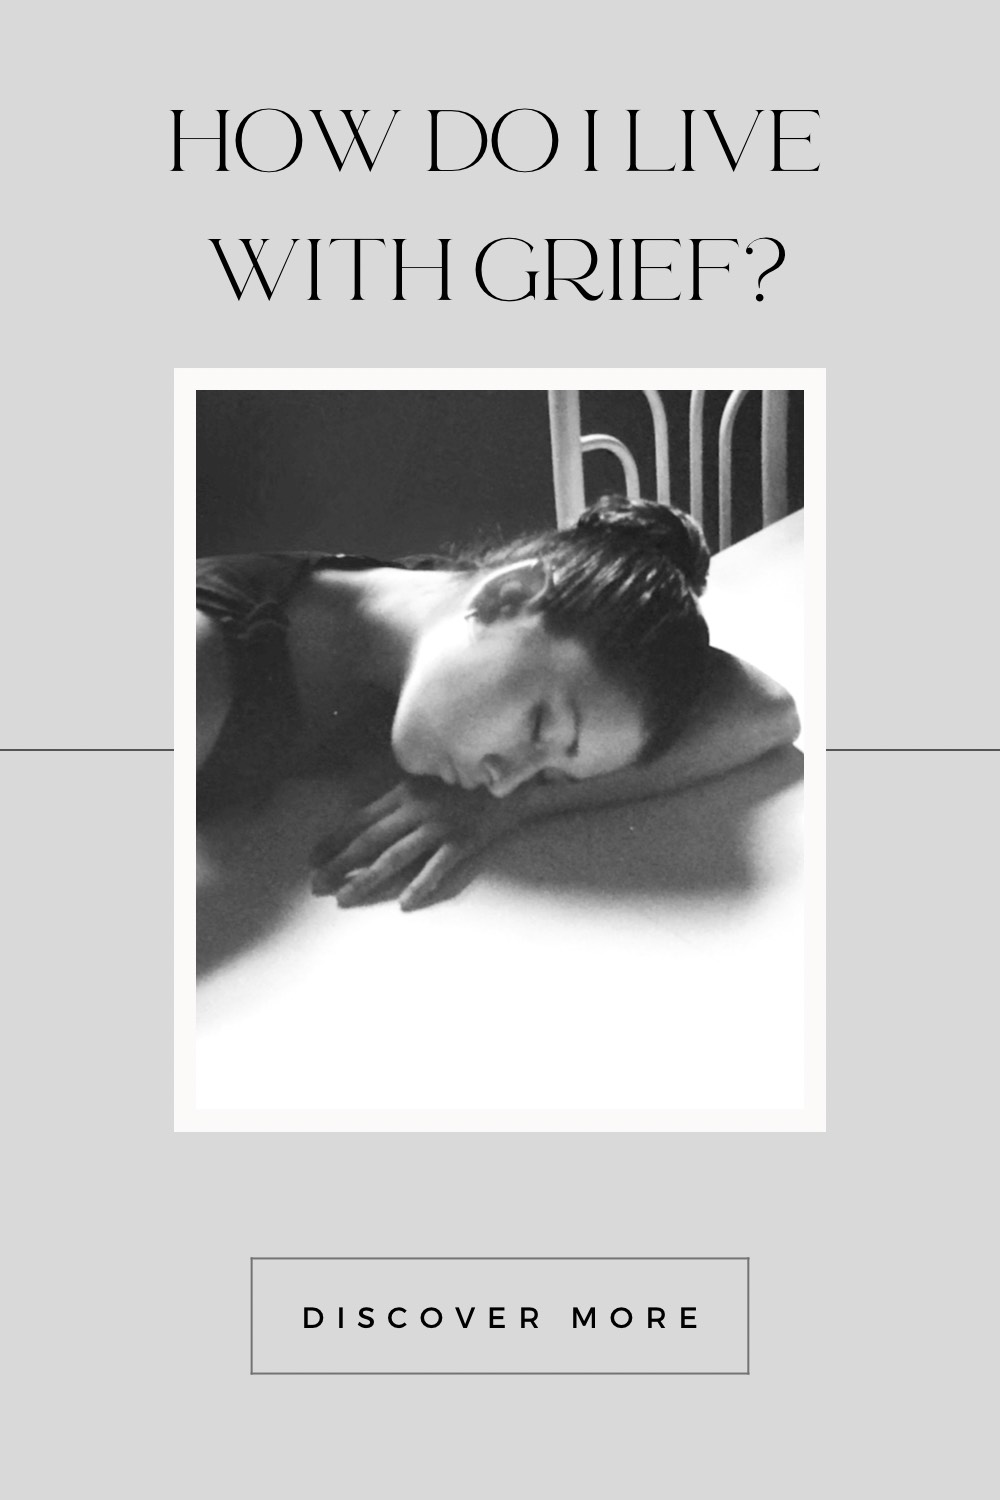 Nancy laying head down on arm at the kitchen table. Black and white. This article covers the question, How do I live with grief?